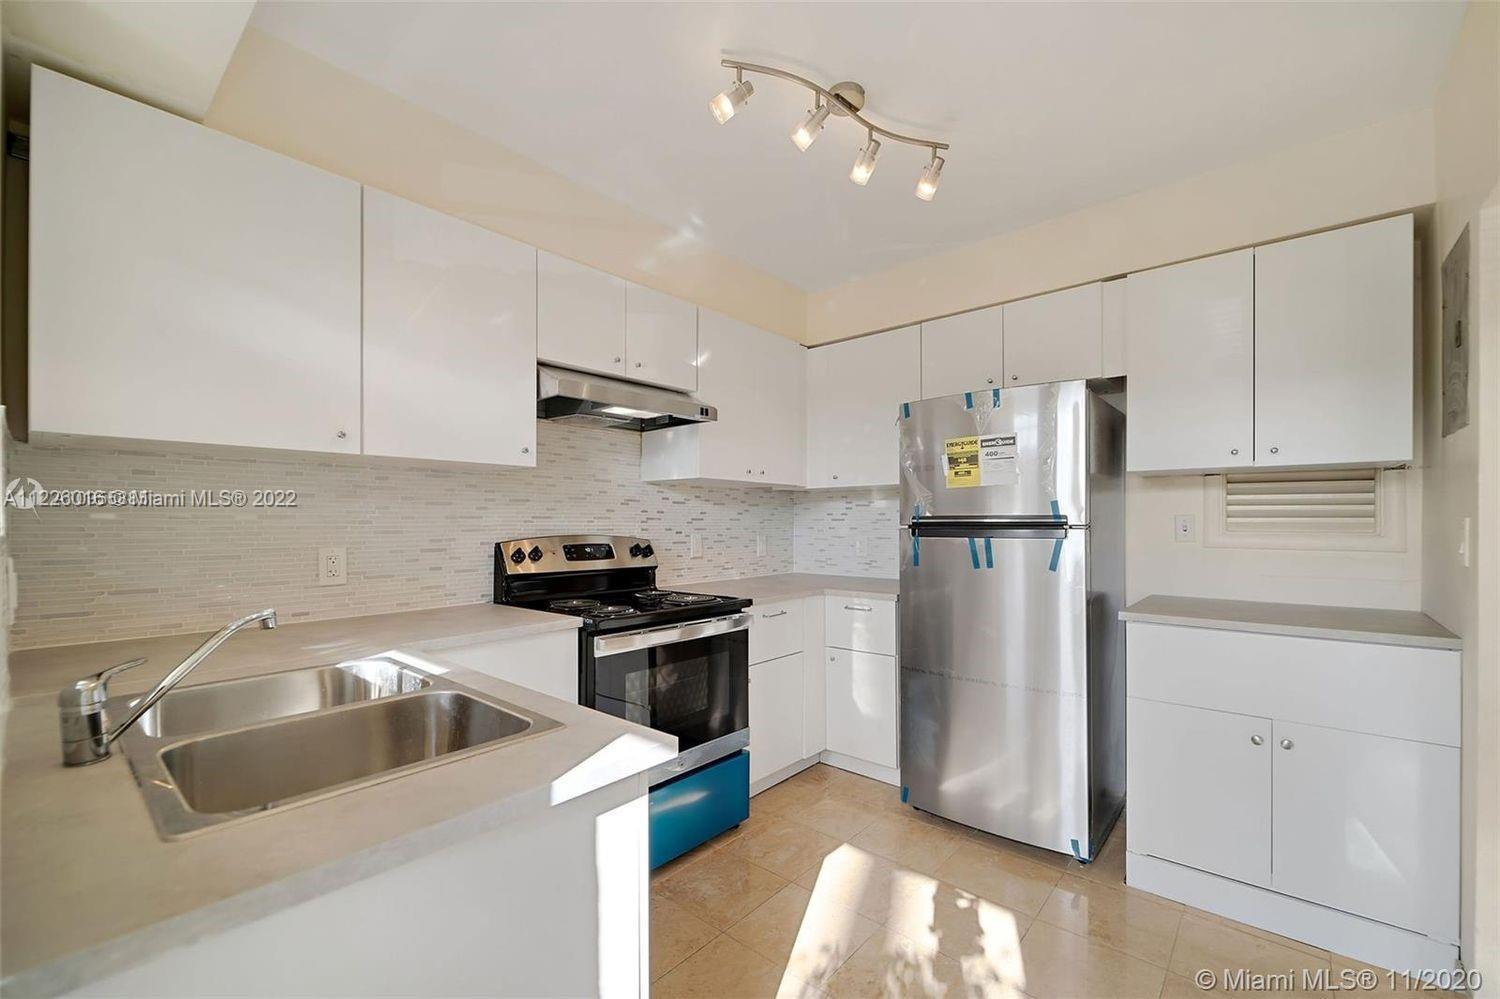 Unique opportunity to own a charming 1 bd, 1 bath unit in the very desirable and exclusive gated Res